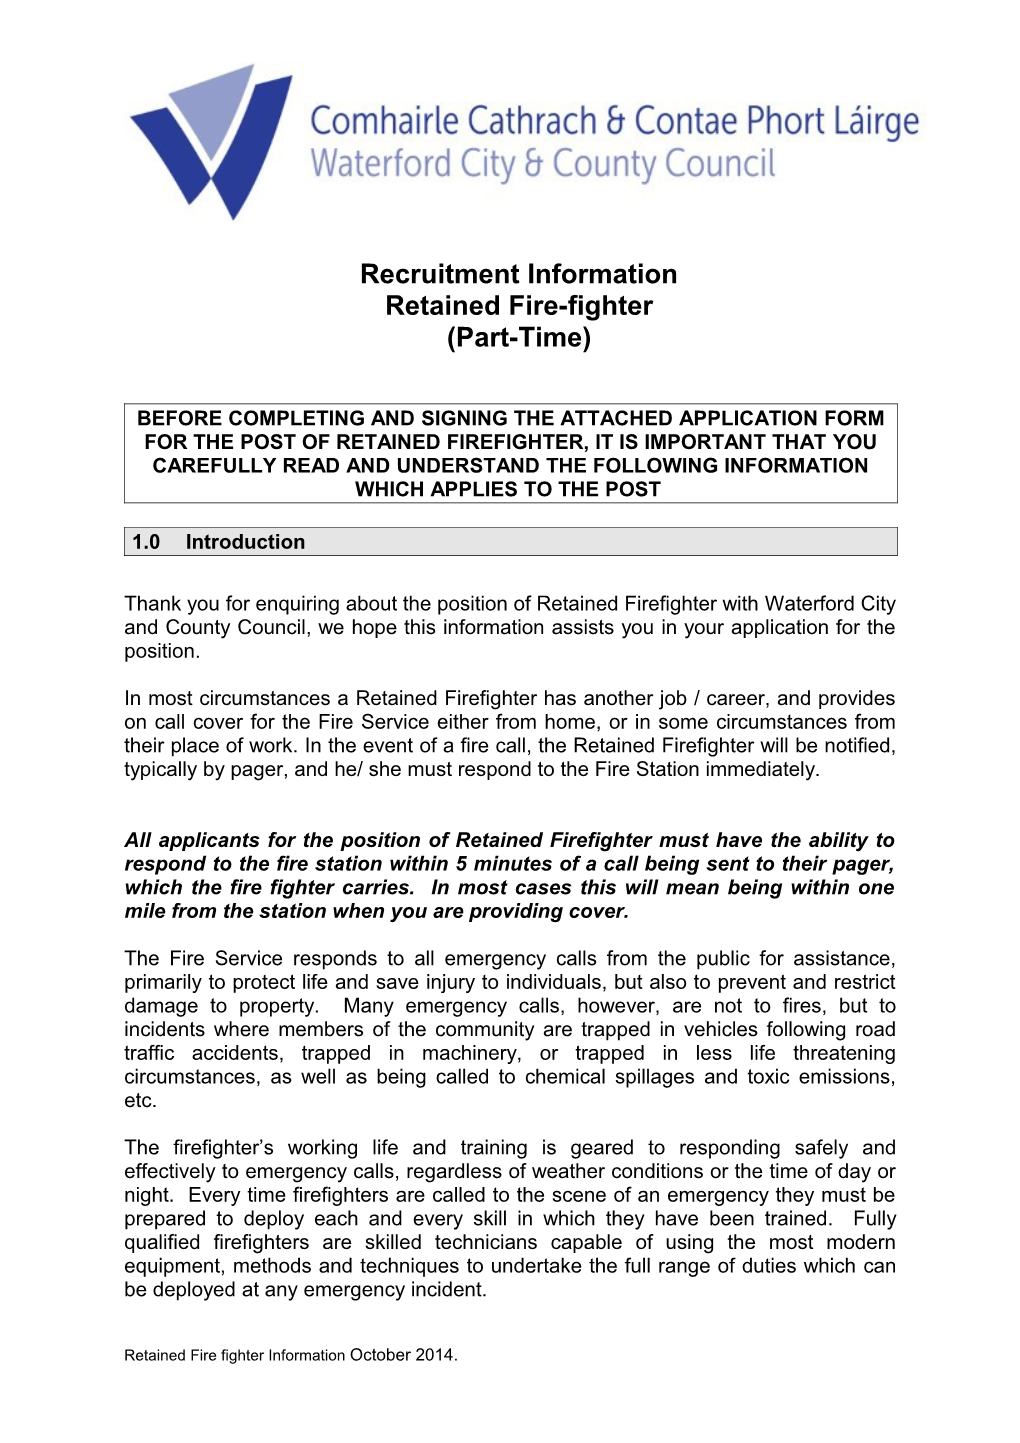 Before Completing and Signing the Attached Application Form for the Post of Retained